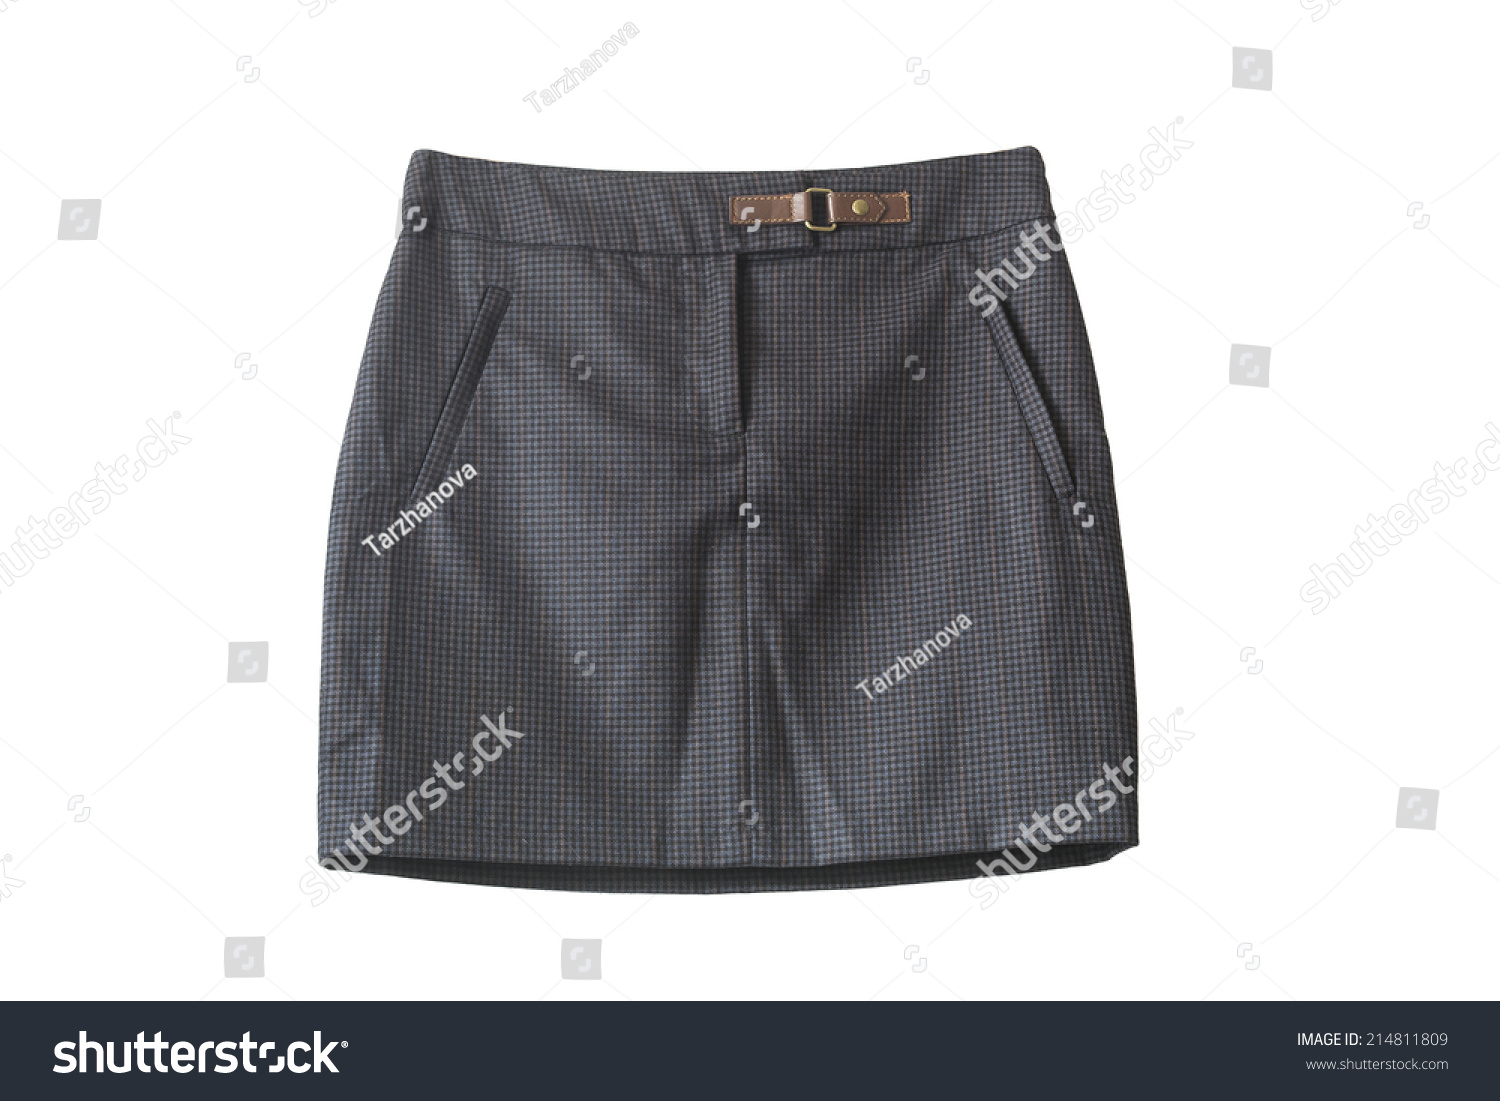 599 Office mini skirt Stock Photos, Images & Photography | Shutterstock